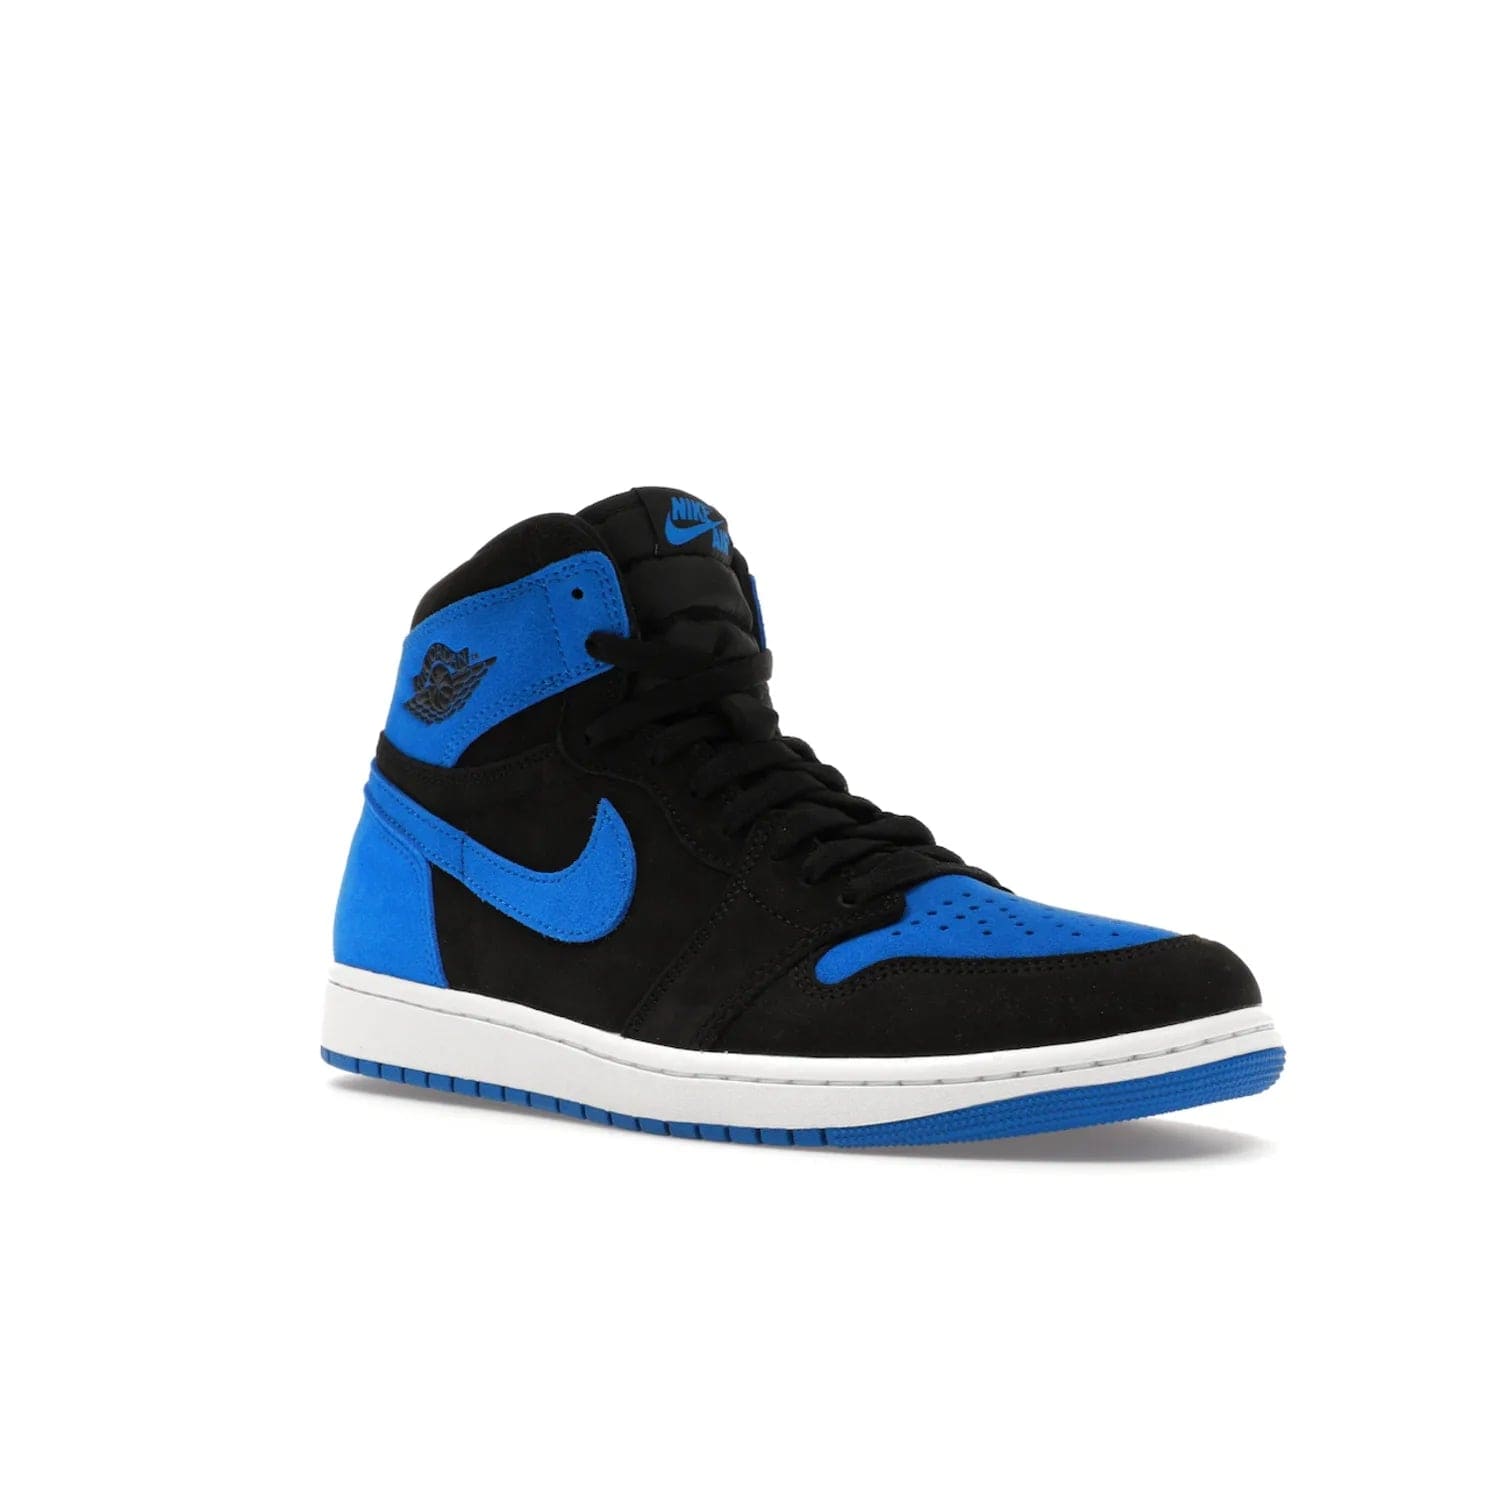 Jordan 1 Retro High OG Royal Reimagined - Image 5 - Only at www.BallersClubKickz.com - ####
Old meets the new: Jordan 1 Retro High OG 'Royal Reimagined' is a bold statement of evolution with its royal blue and black suede material makeup. Swoosh overlays, Wings logos, padded ankle collars and Nike Air tags maintain the OG's legendary lineage. Get a pair on November 4th and be part of a fearless, unyielding story.